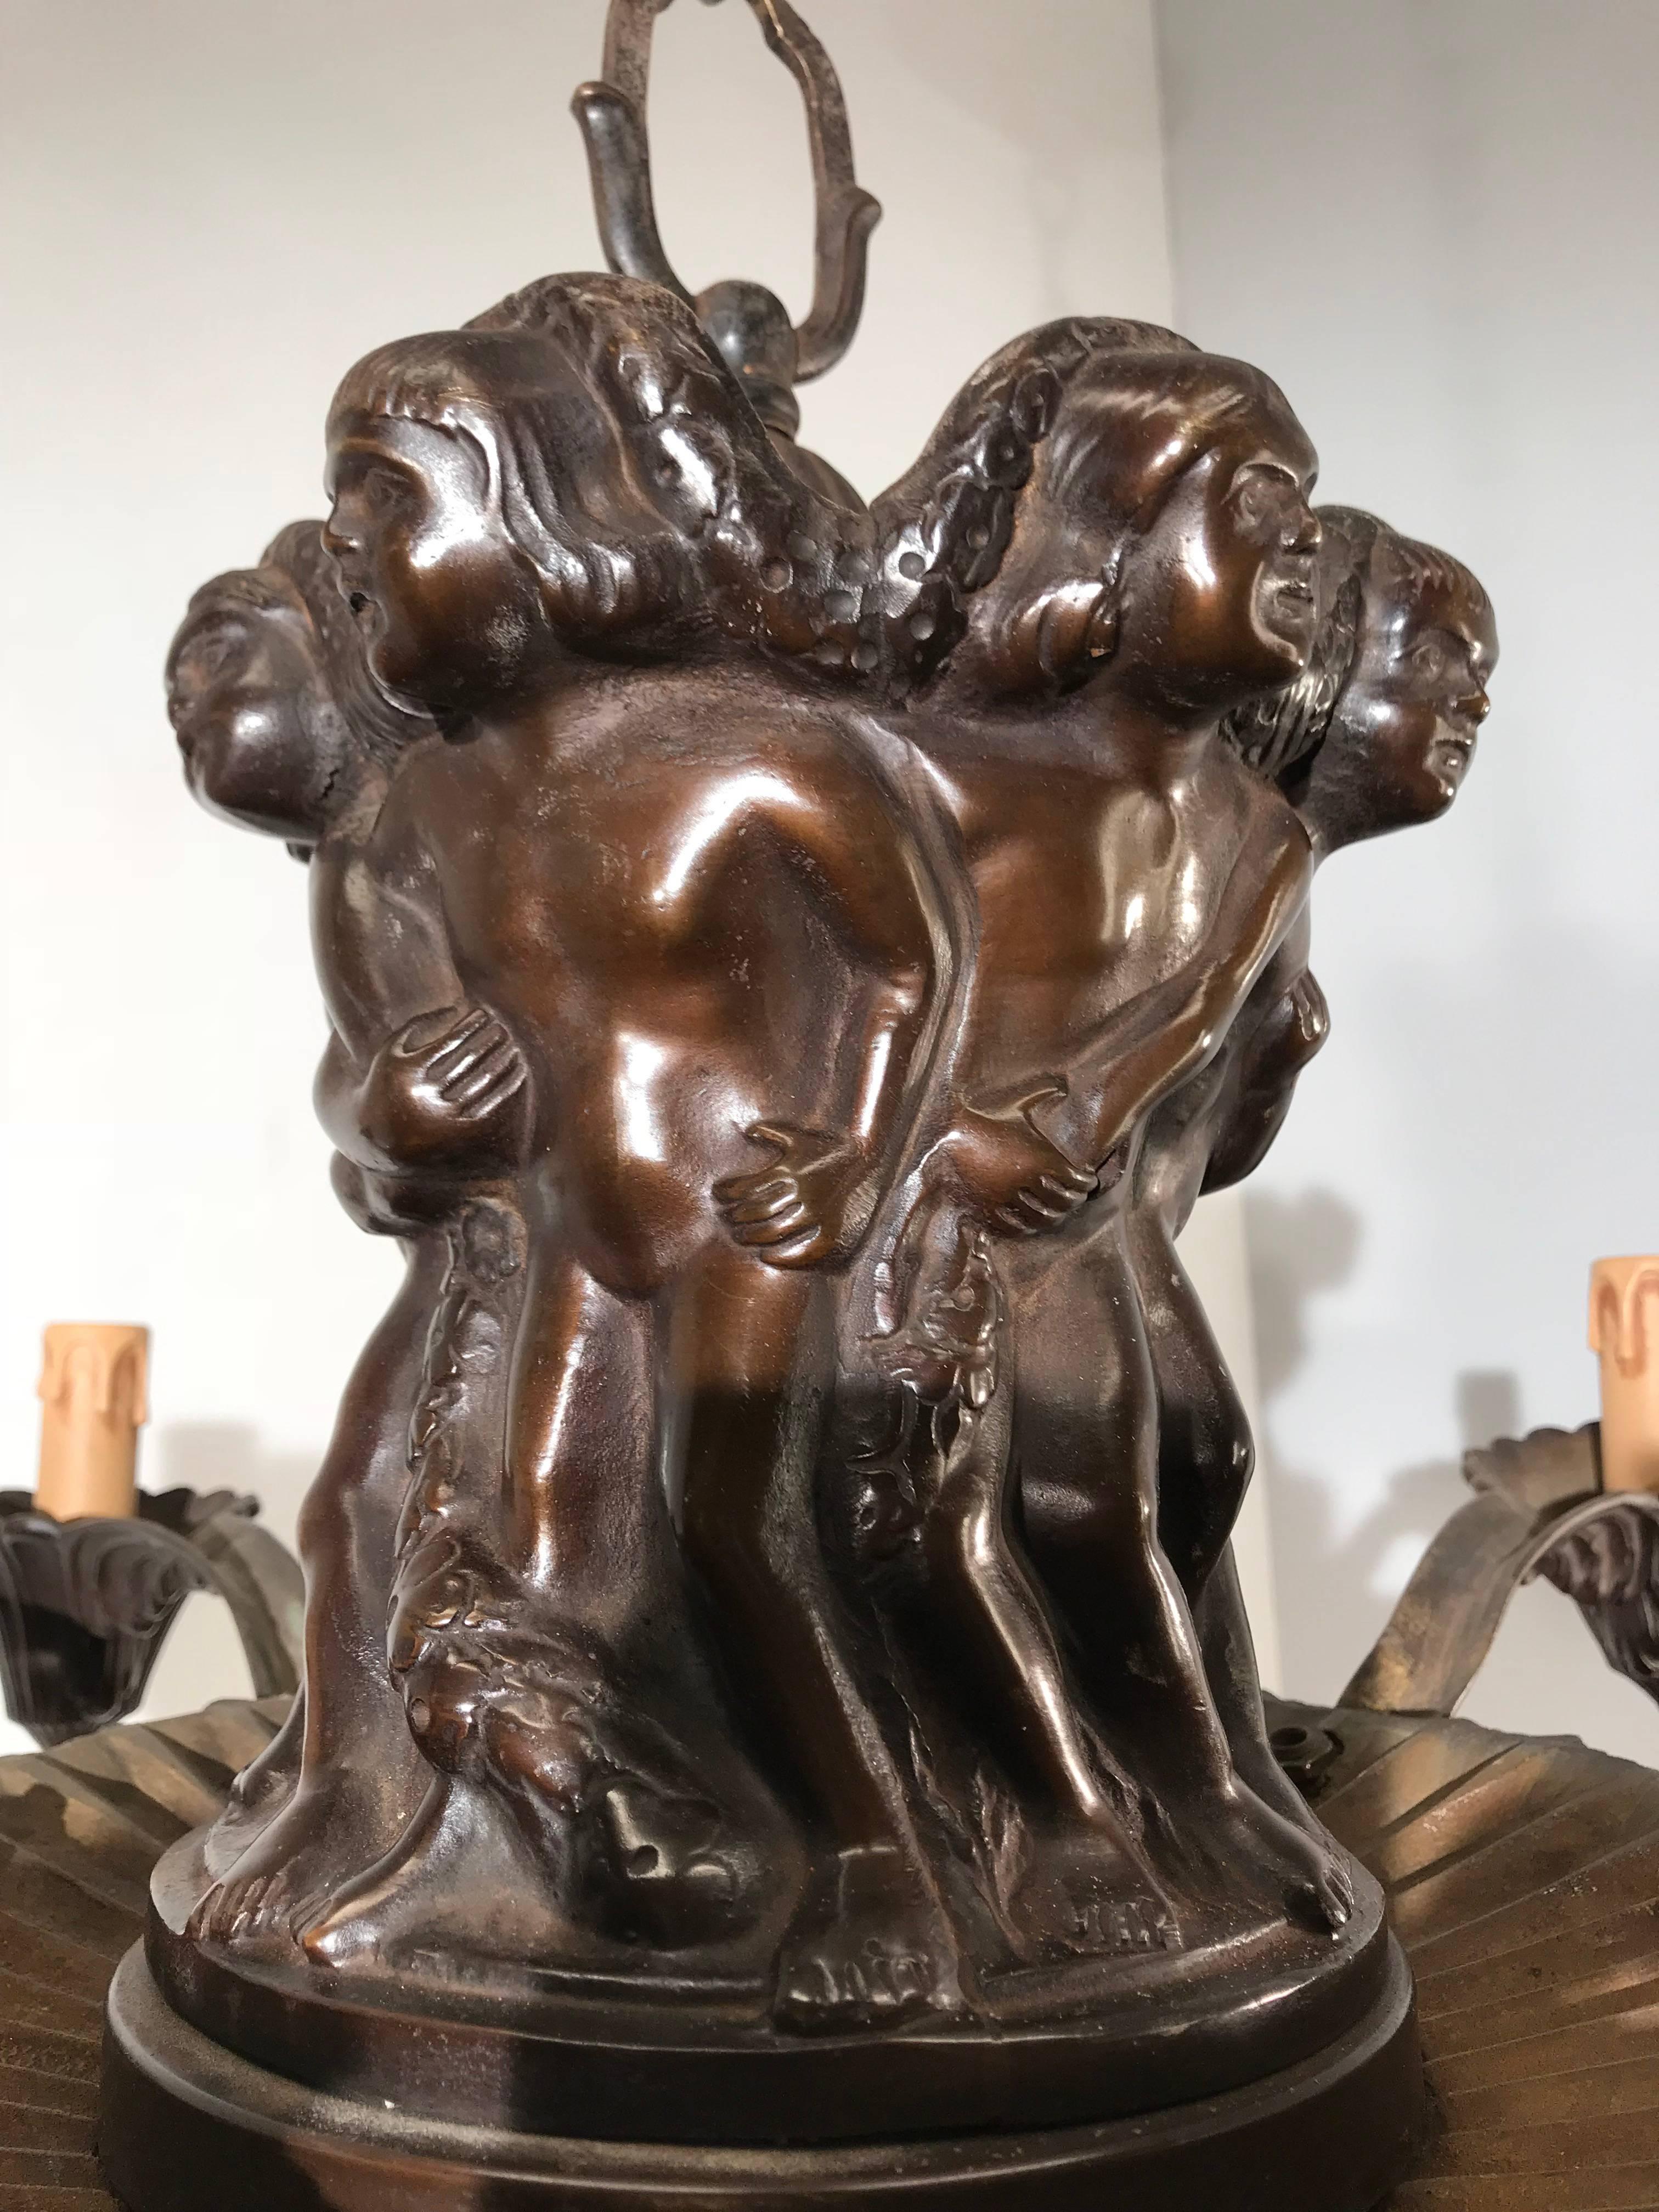 Early 1900s rare and sculptural chandelier.

This antique and heavy quality chandelier comes with a mounted putti group sculpture and we think the underlying meaning is of all times. The bronze sculpture atop this work of lighting art shows us six